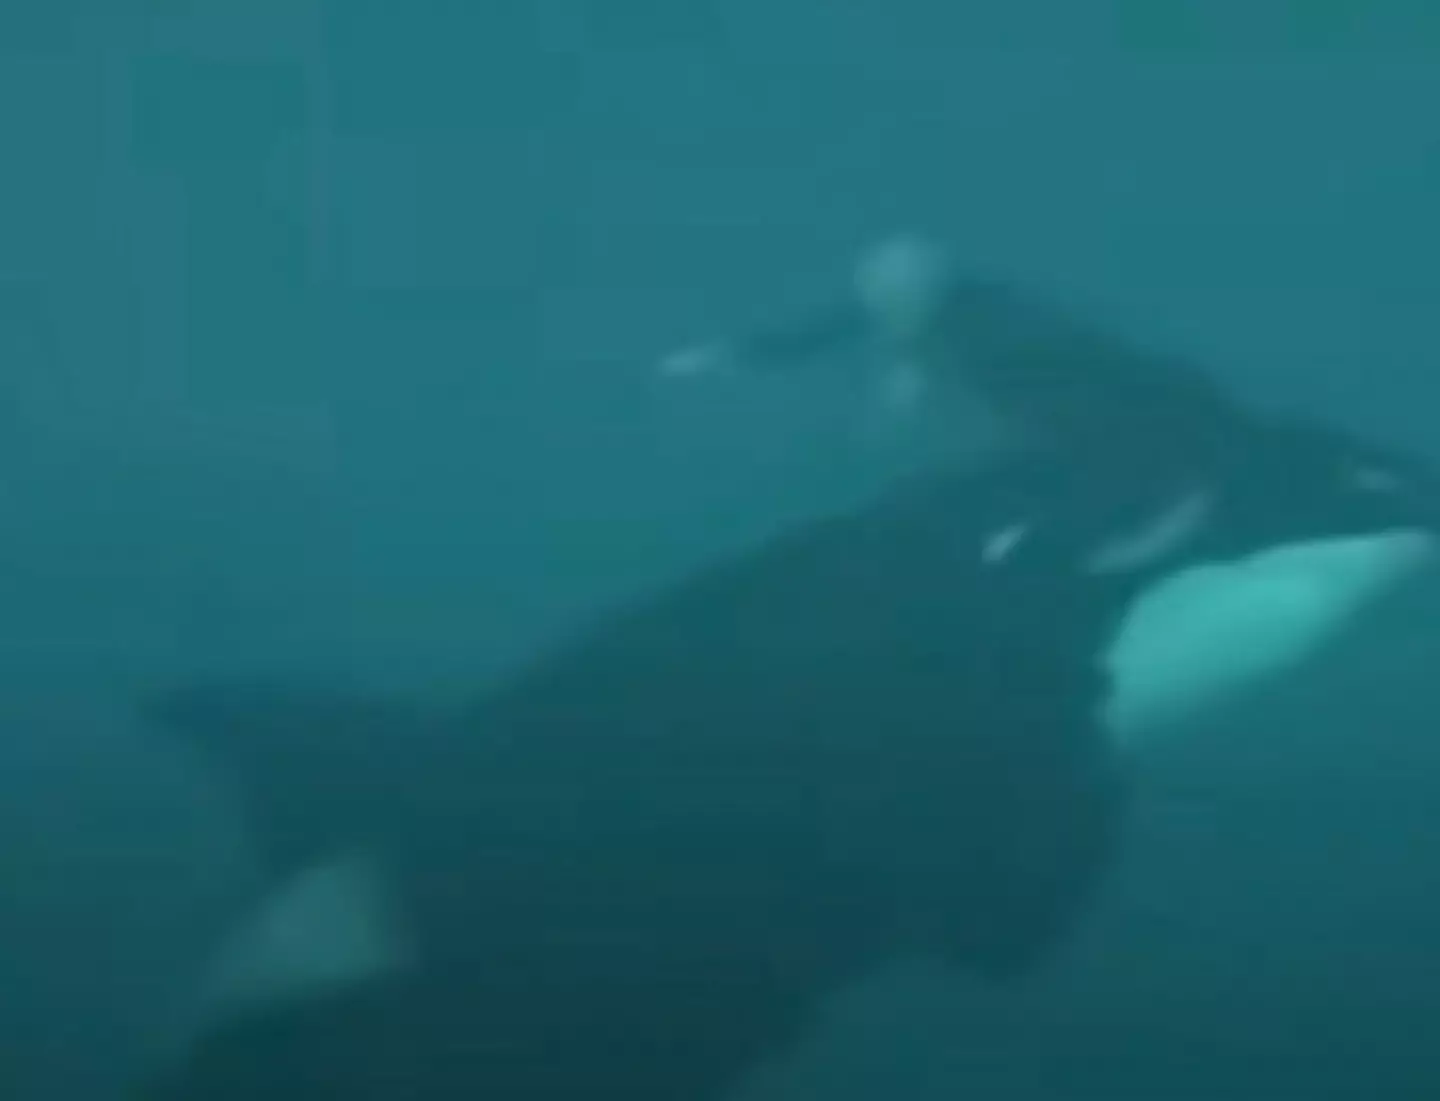 Shortly after Peters entered the water with Kasatka, the situation turned south.